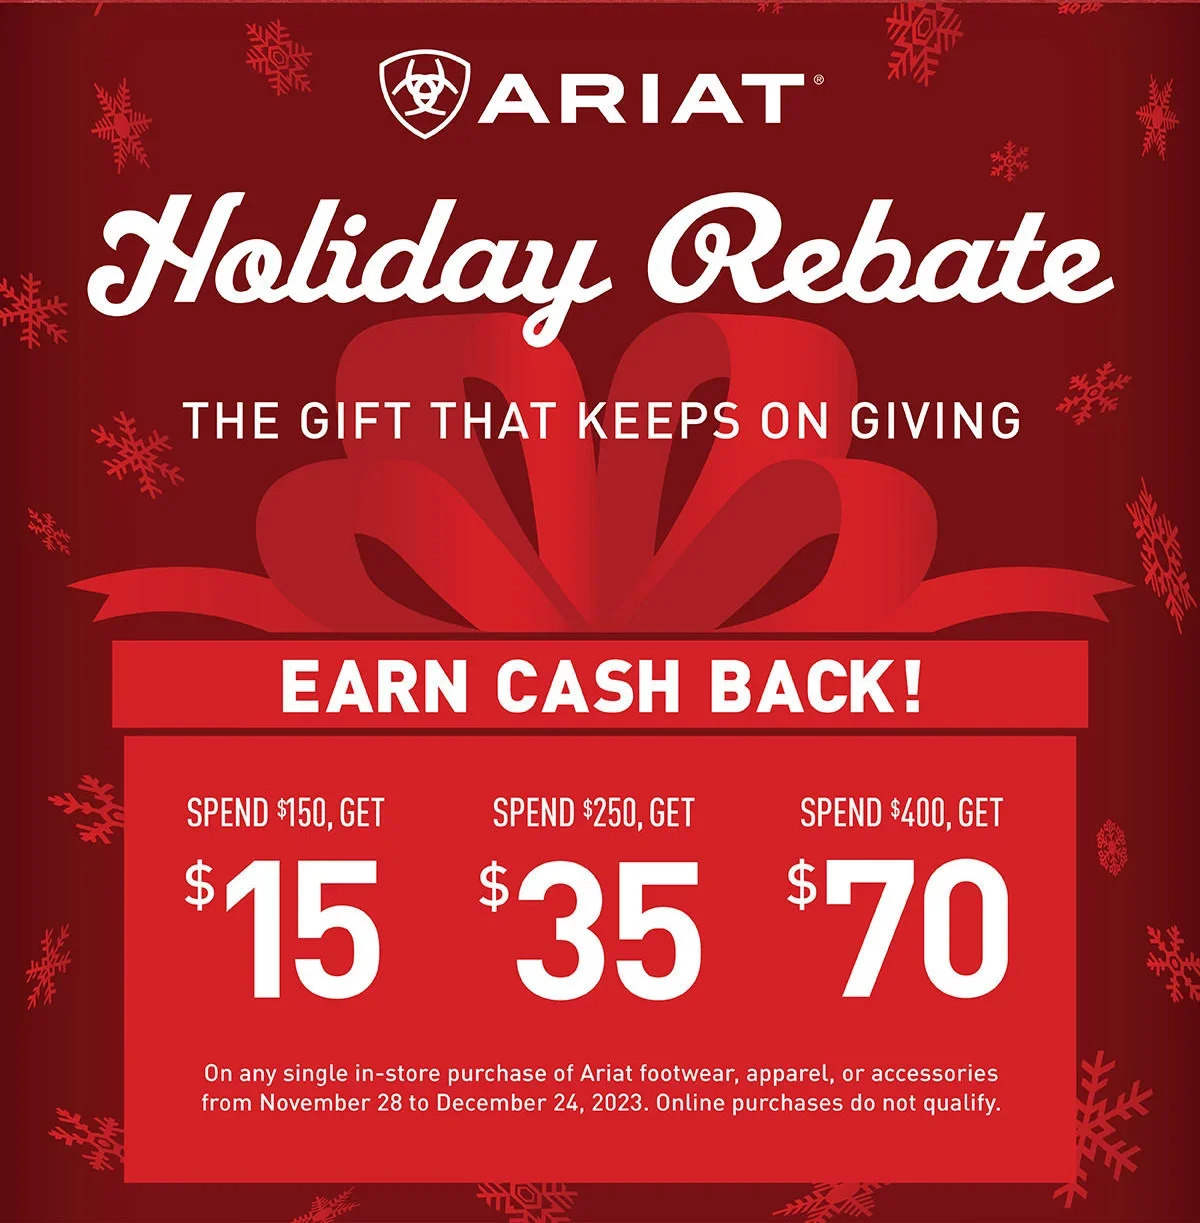 Ariat Holiday Rebate | The Gift That Keeps on Giving | Earn Cash Back! | Spend \\$150, Get \\$15 - Spend \\$250, Get \\$35 - Spend \\$400, Get \\$70 on any single in-store purchase of Ariat footwear, apparel, or accessories from November 28 to December 24, 2023. Online purchases do not qualify.